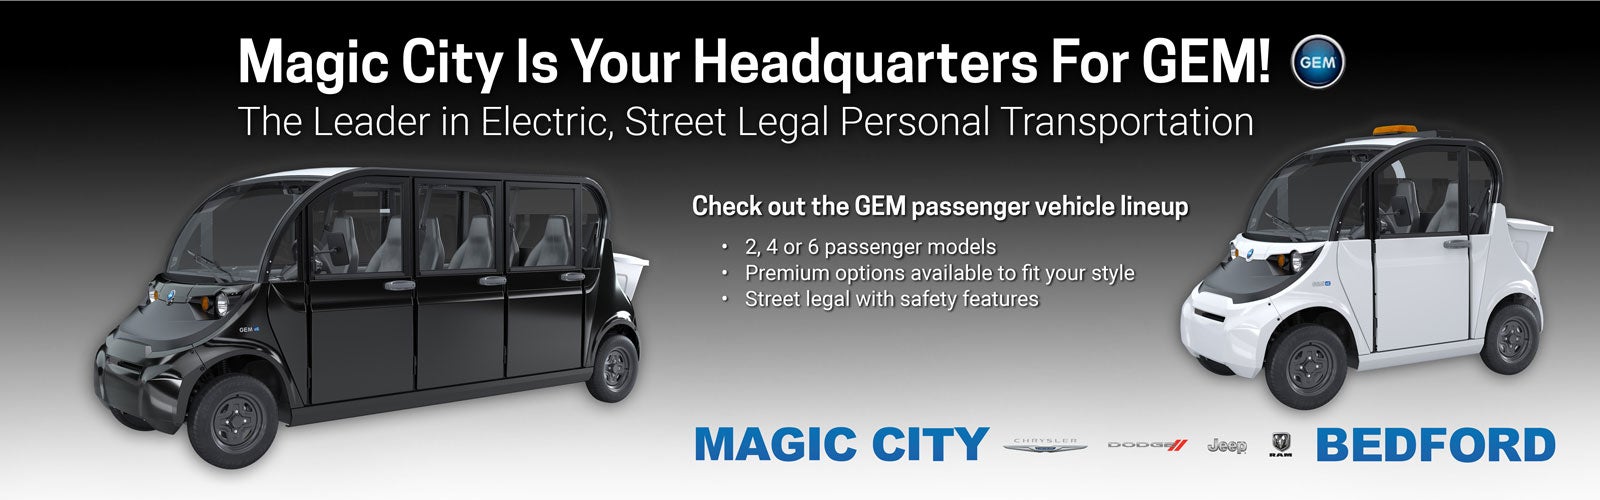 Magic City is Your Headquarters for GEM